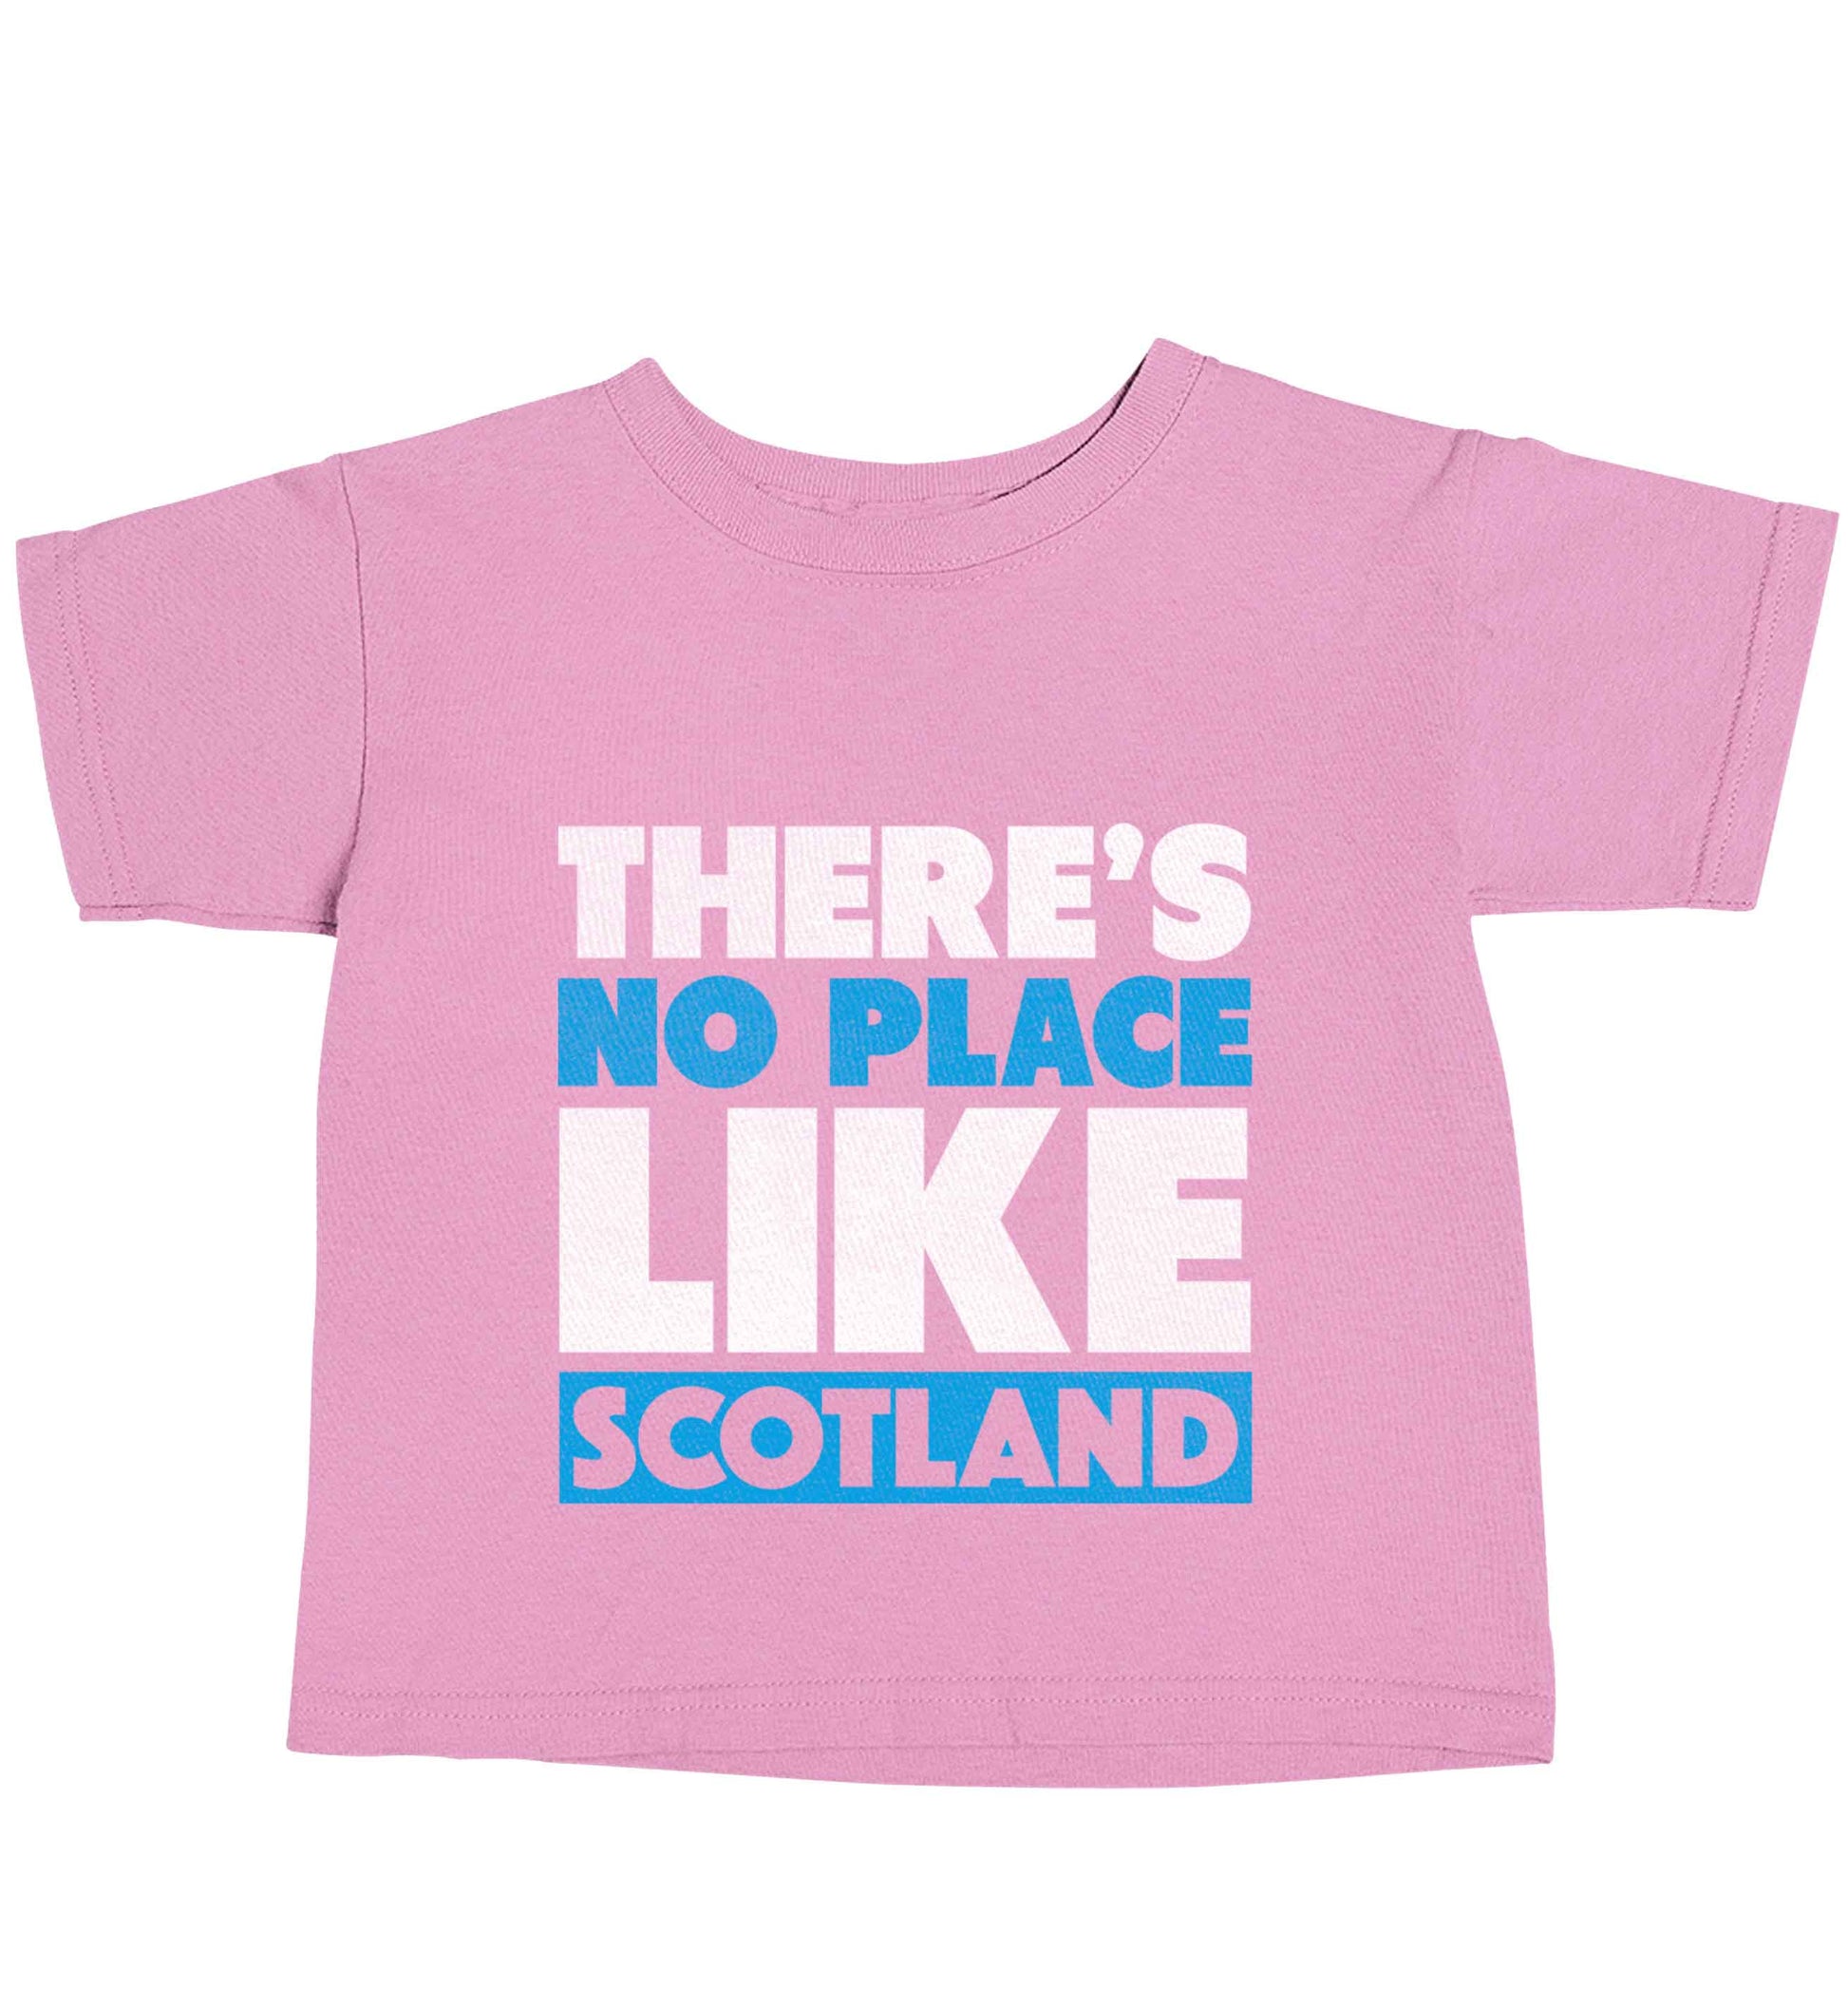 There's no place like Scotland light pink baby toddler Tshirt 2 Years